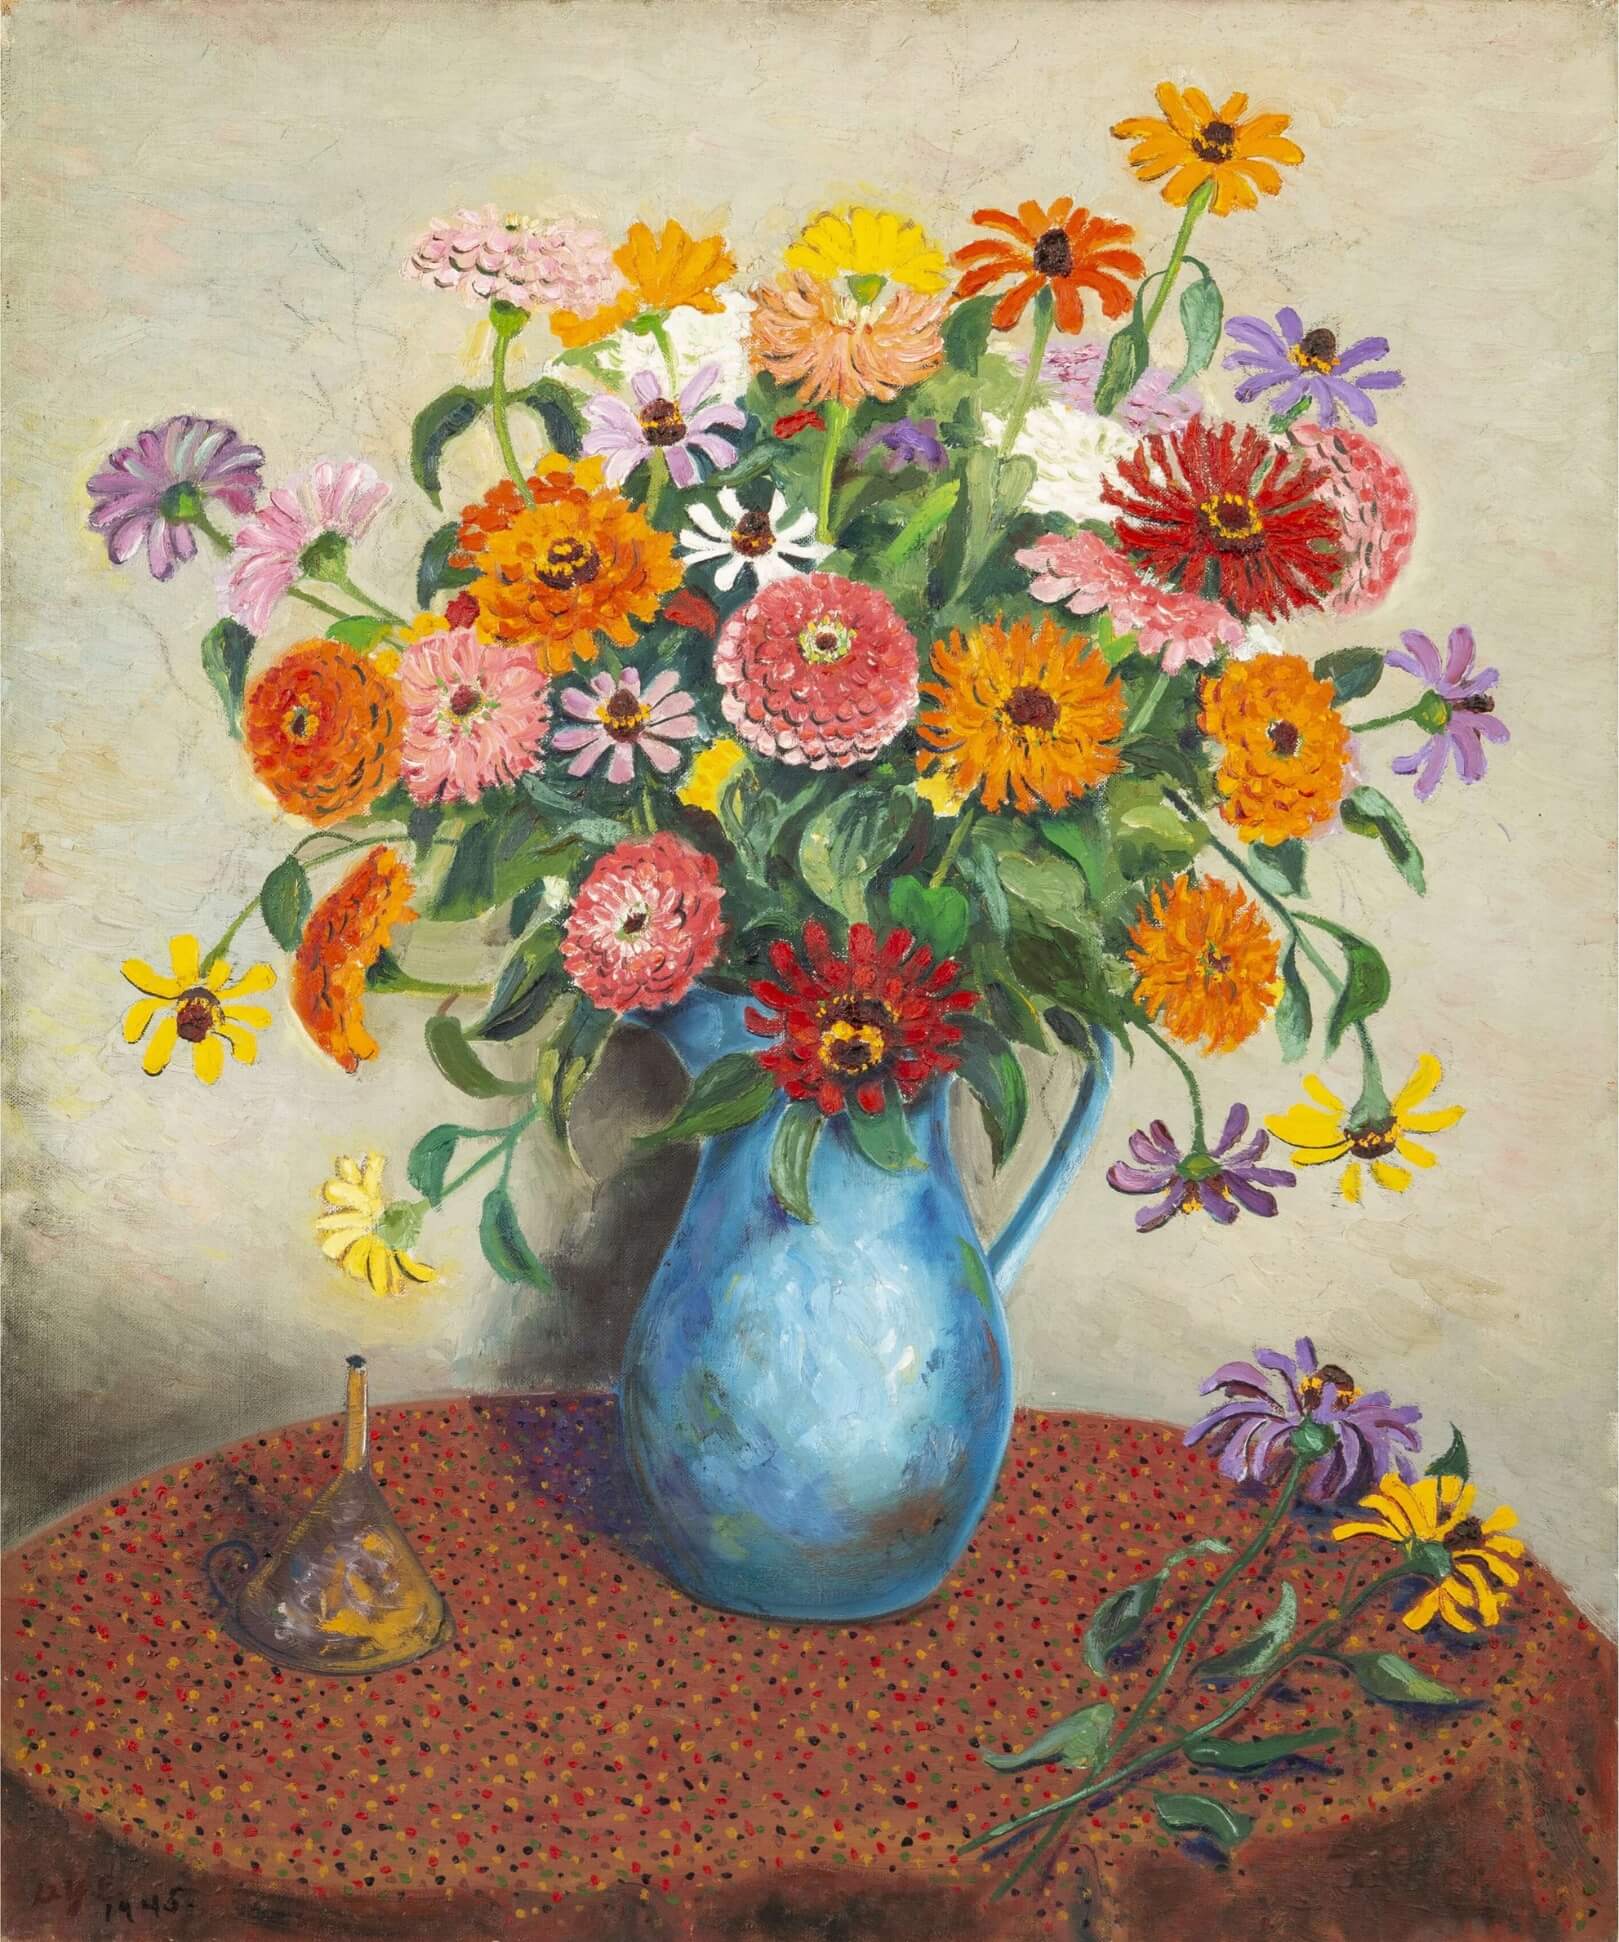 David Ellinger (1913-2003), <em>Flowers I Grew</em>, 1945. Oil on canvas, 30 x 25 inches

Collection of Dr. David Bronstein, photo by Michael E. Myers